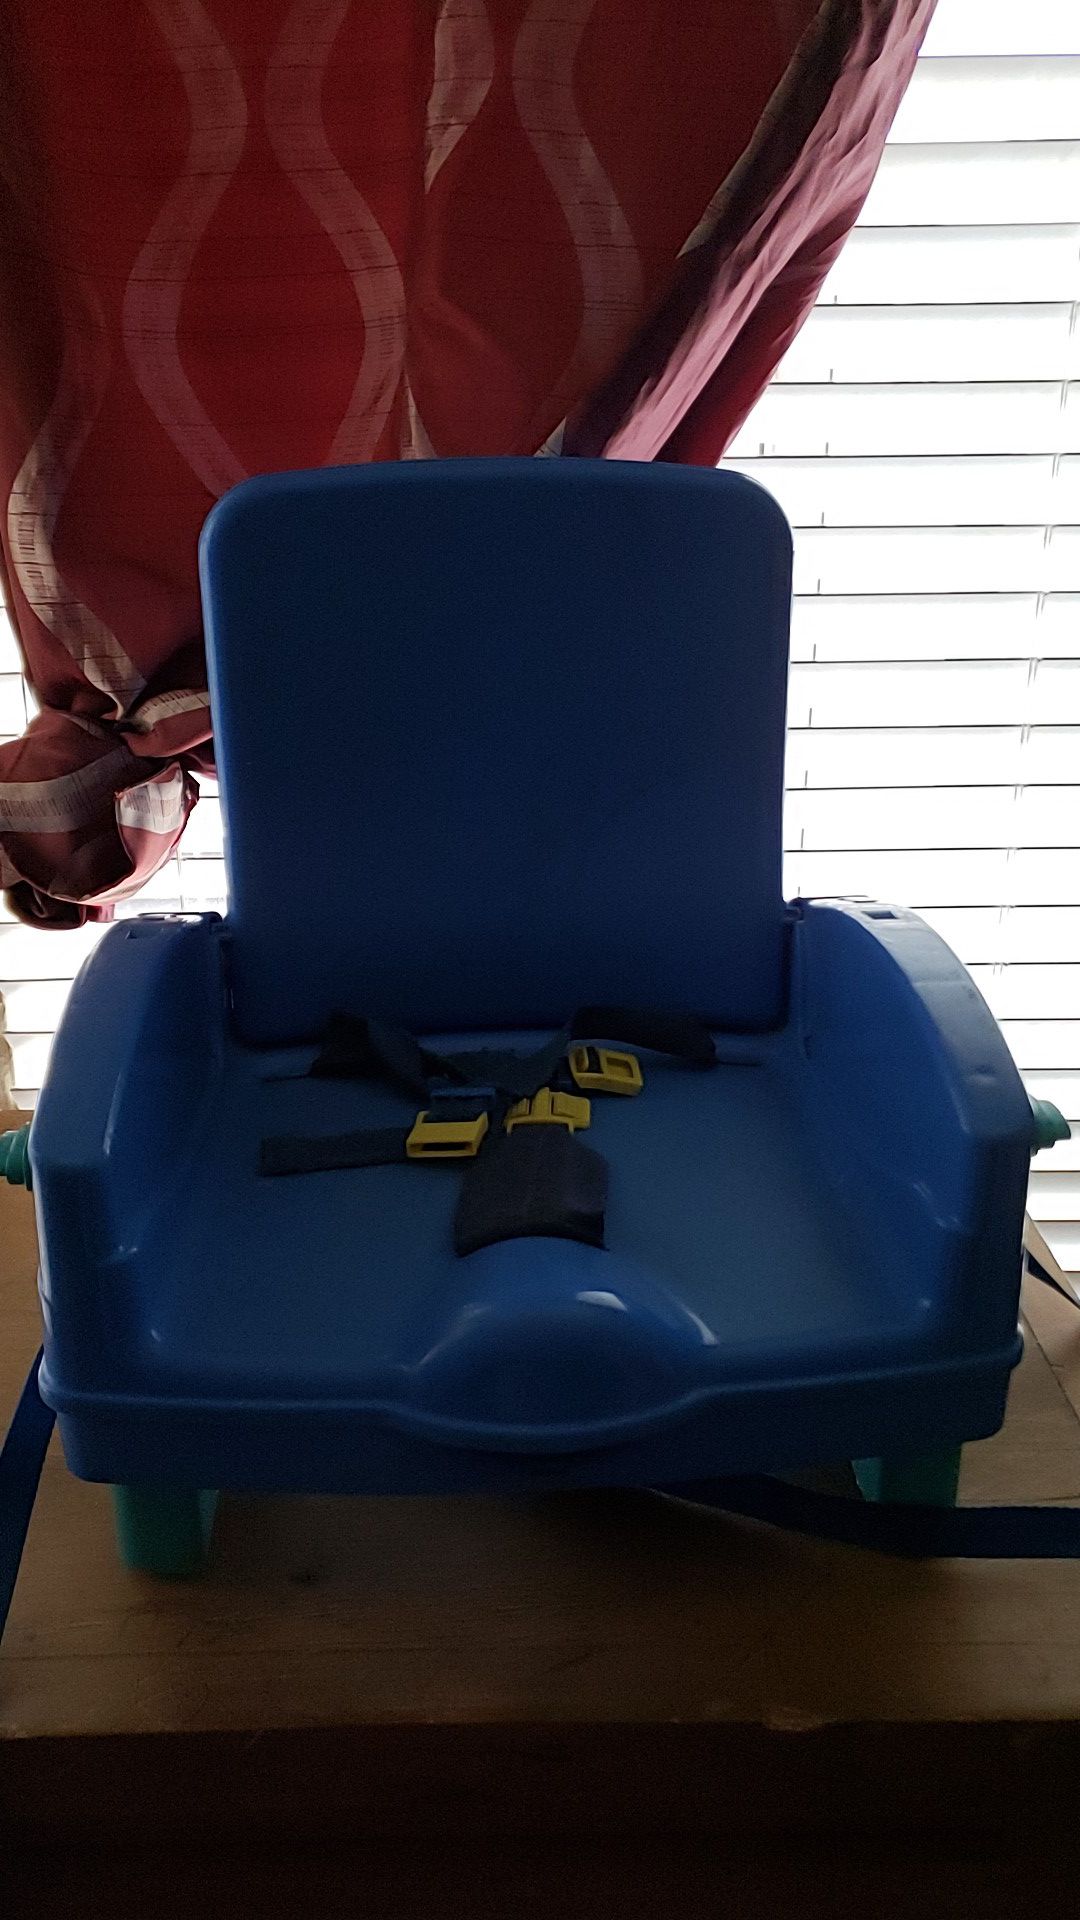 Booster seat for kids to sit at table with family